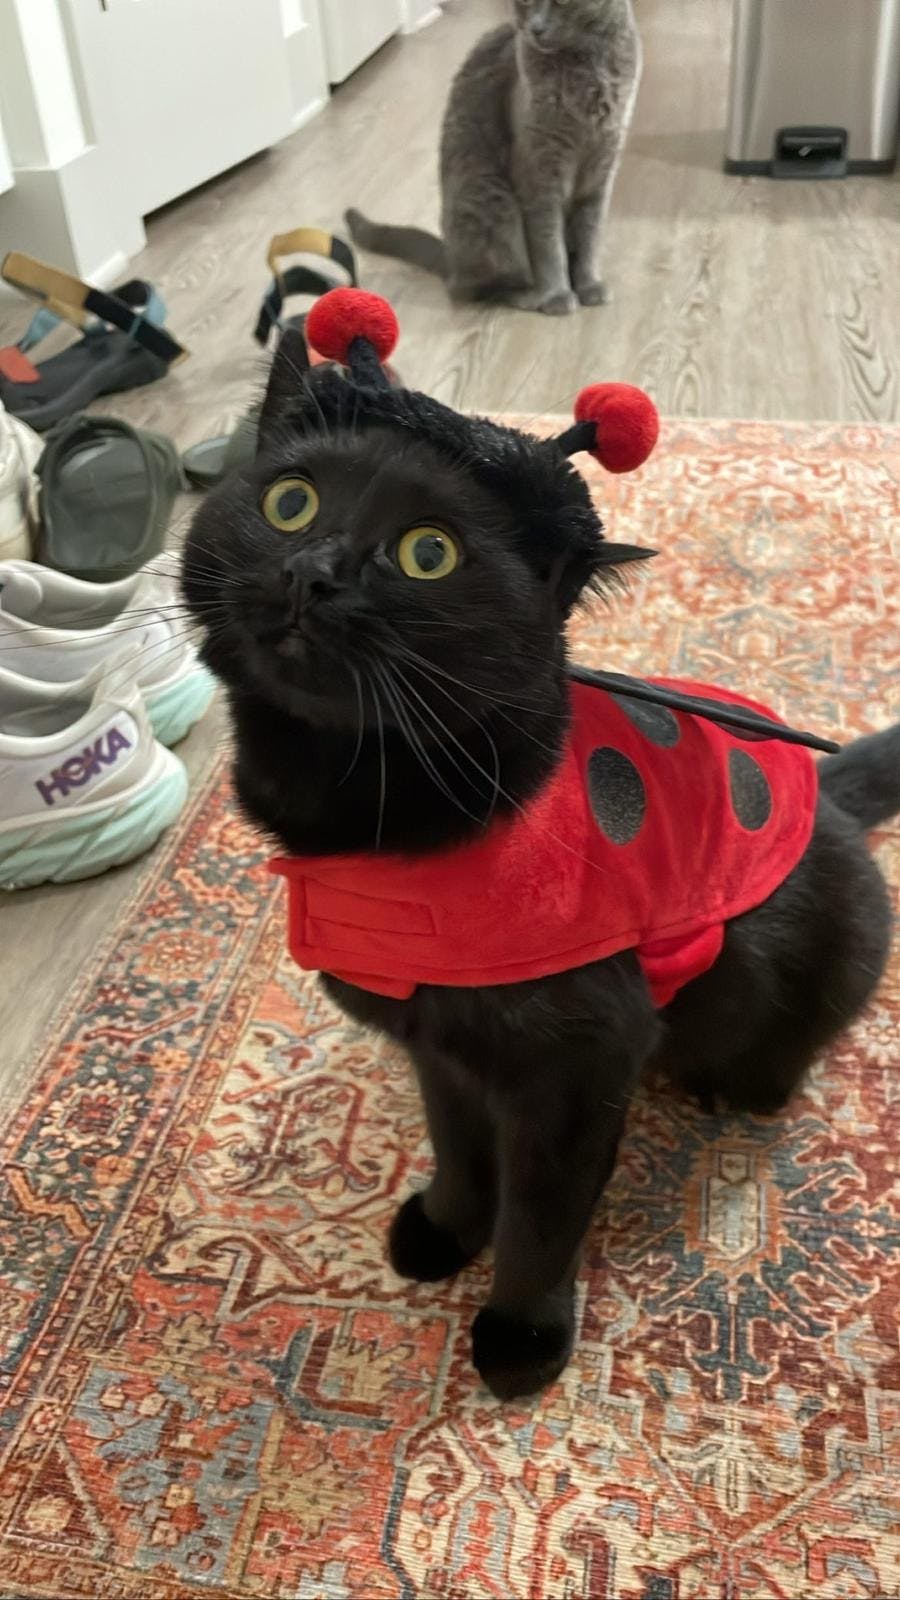 Evie, a small black cat in a ladybug costume